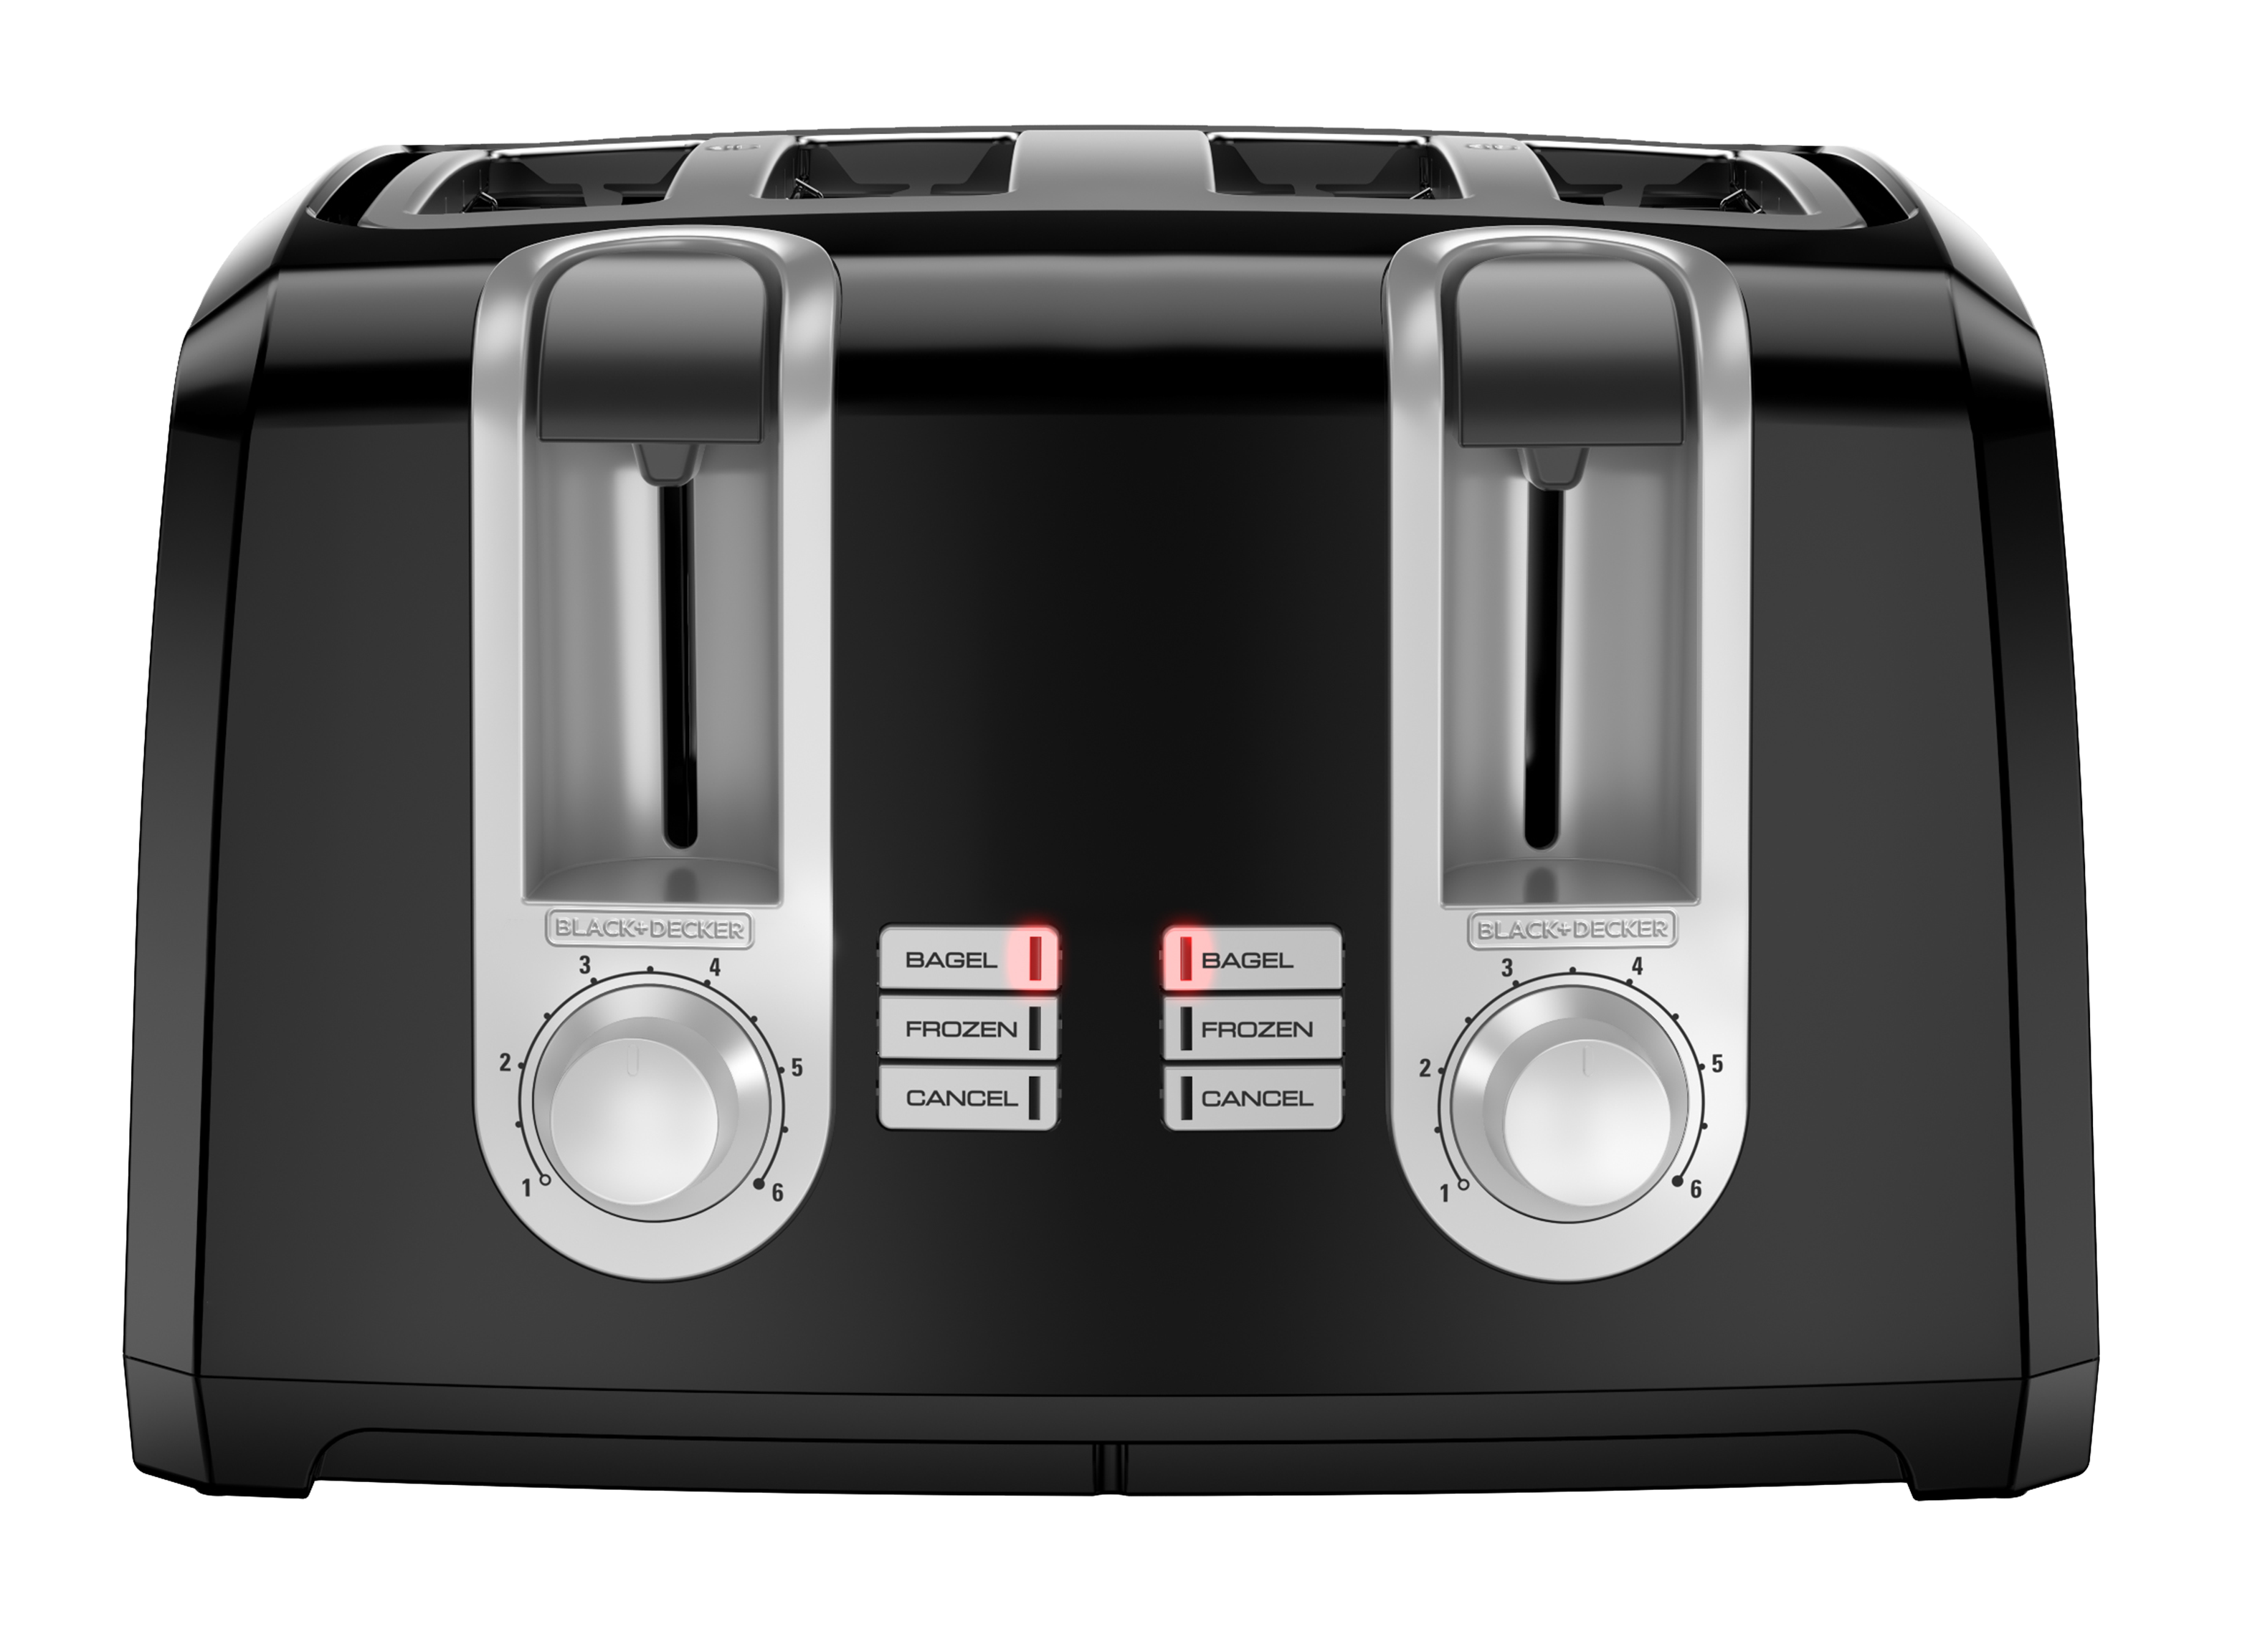 Black+Decker T4569B 4-Slice Toaster & Toaster Oven Review